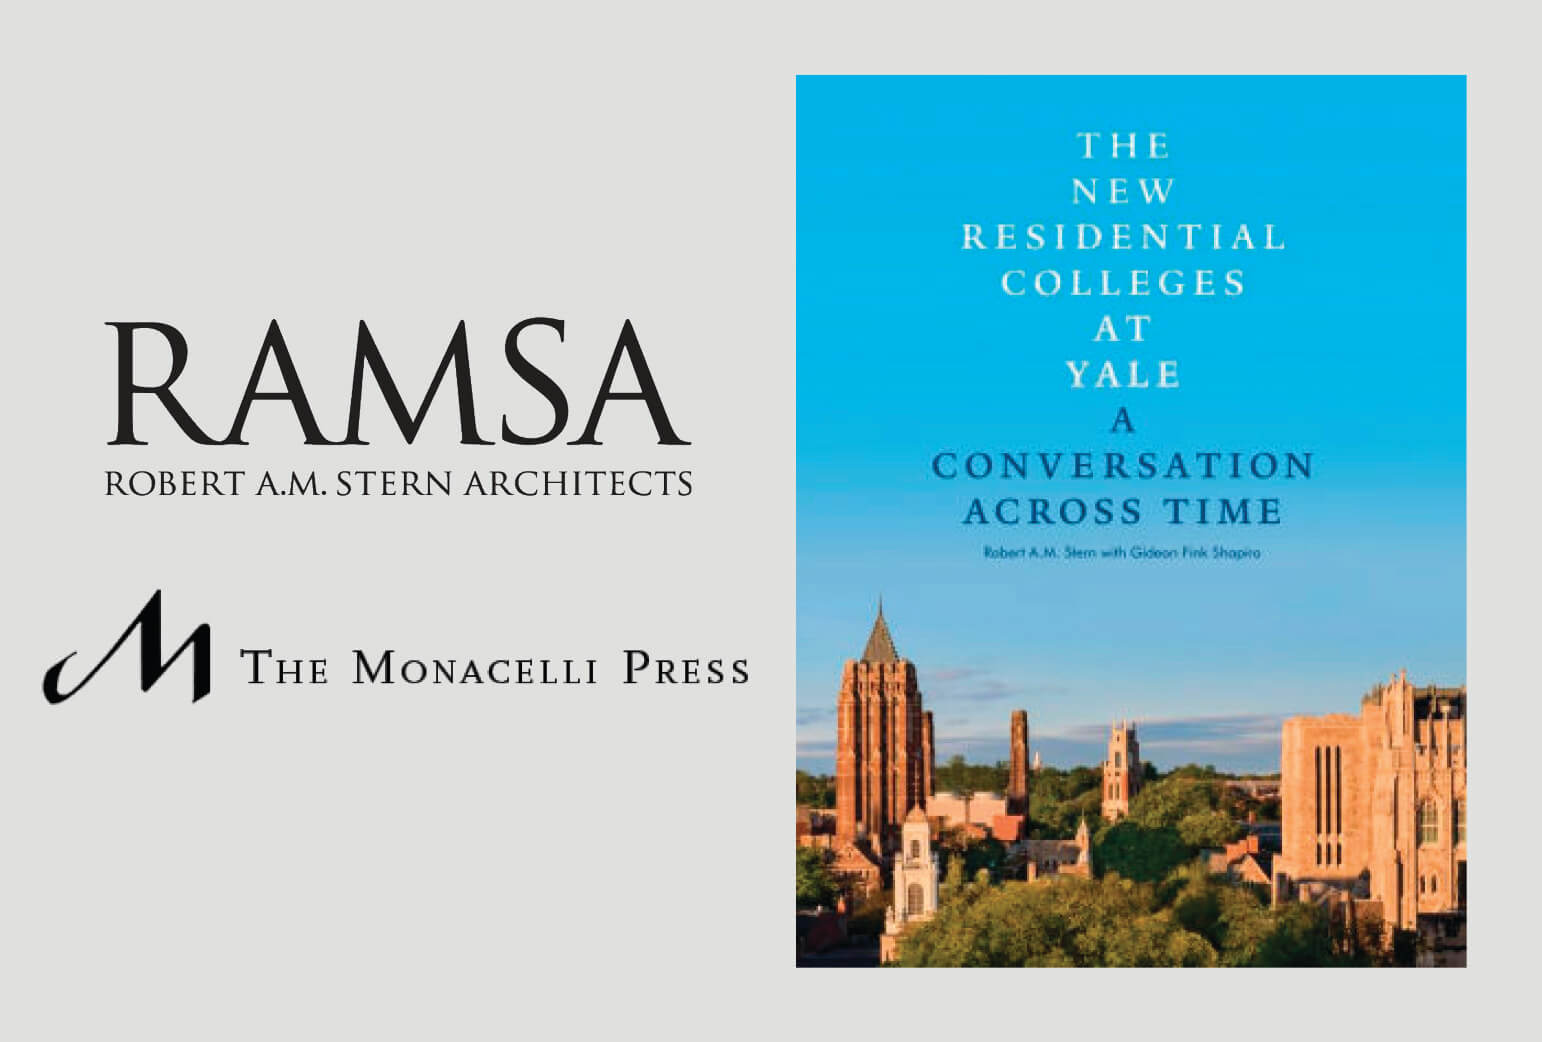 The New Residential Colleges at Yale: A Conversation Across Time Released by The Monacelli Press